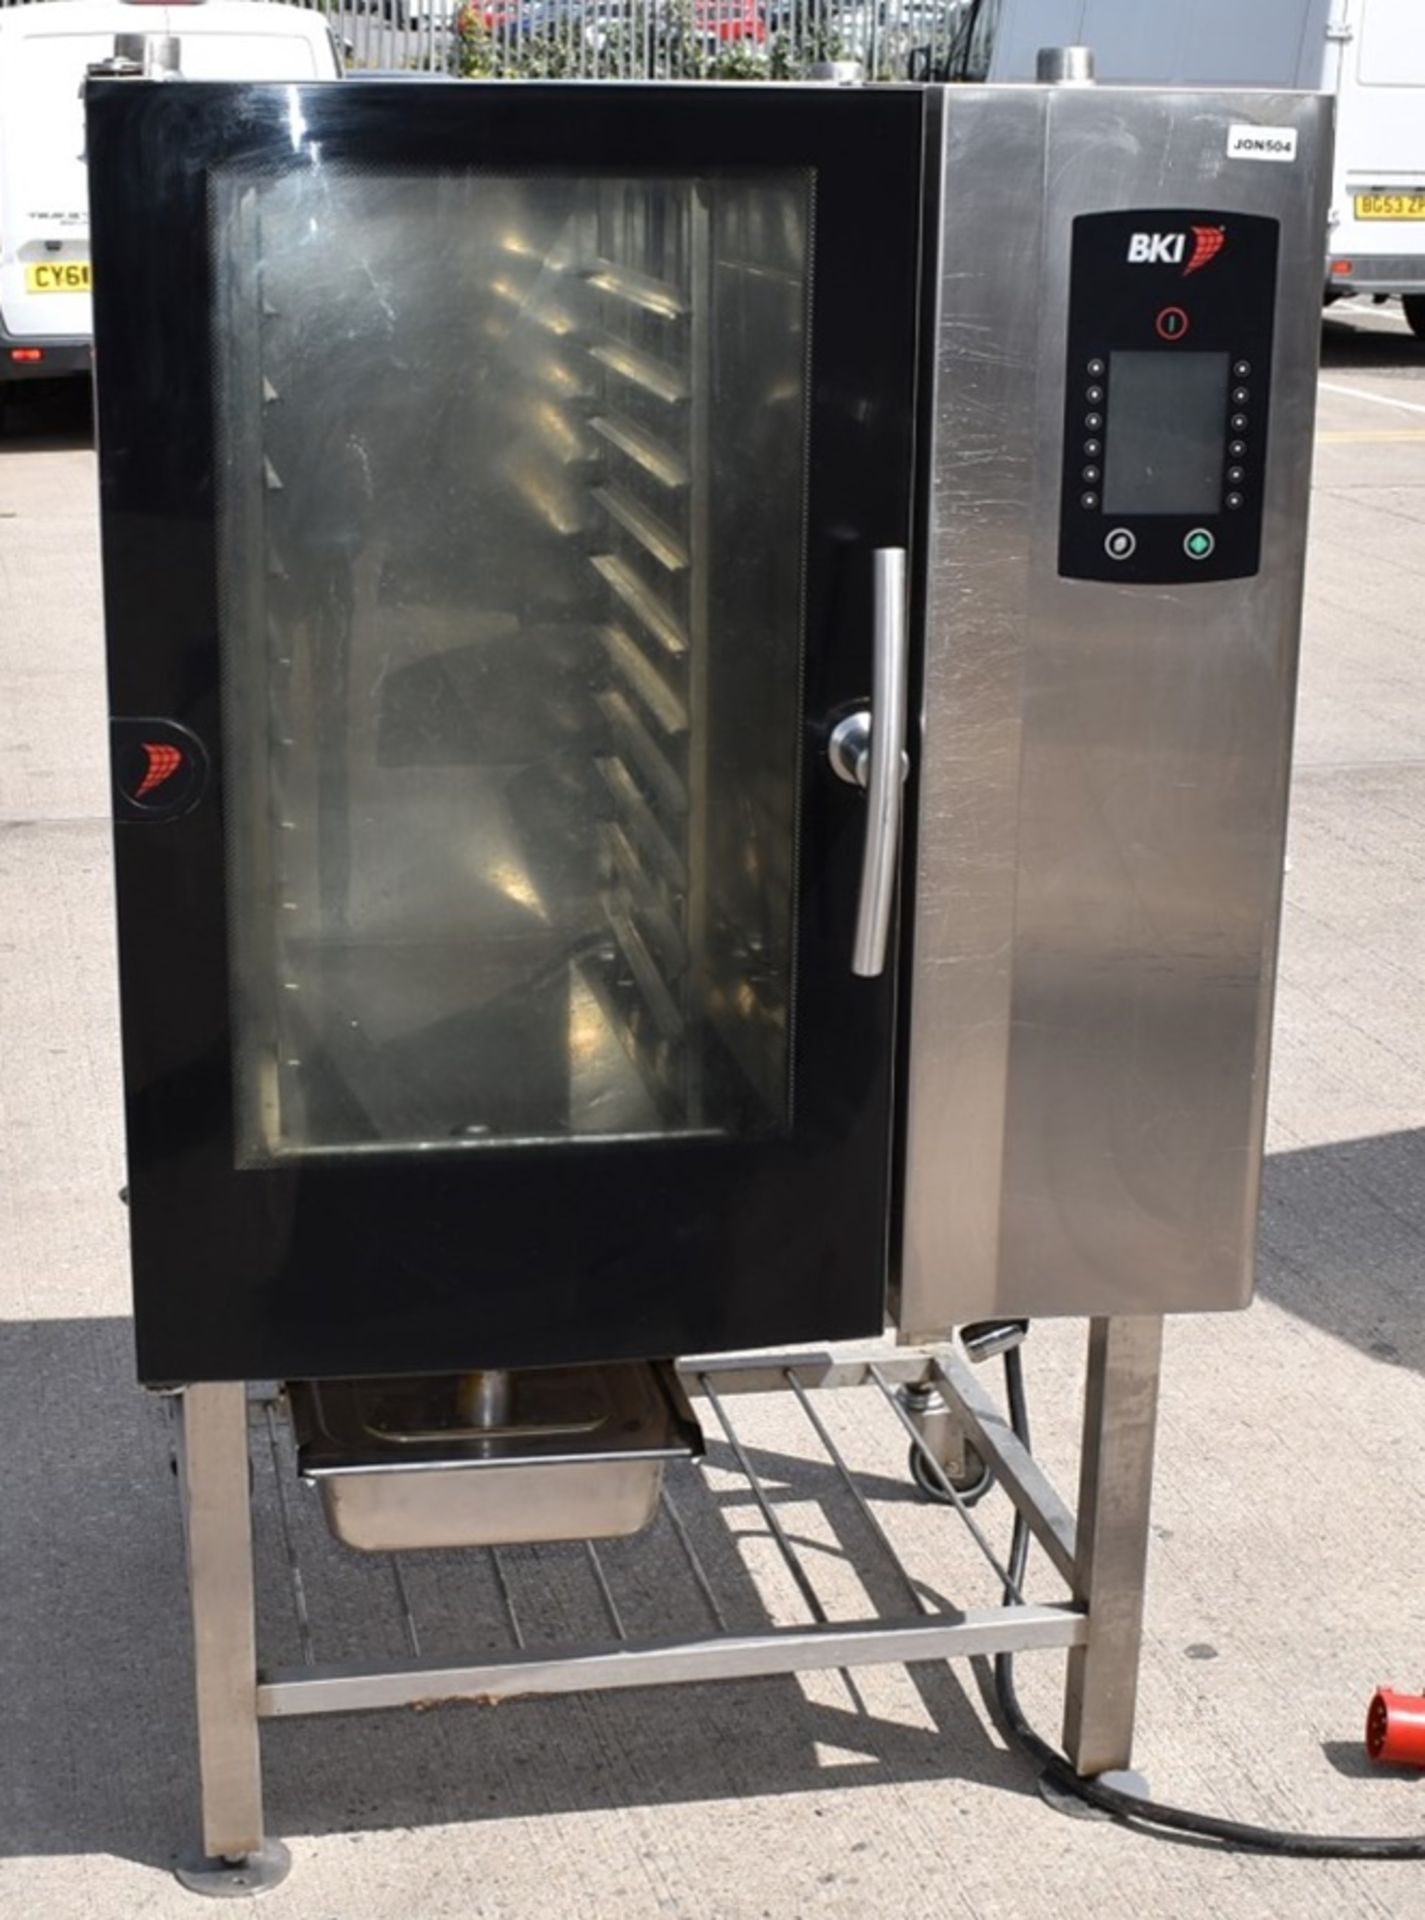 1 x Houno CPE 1.06 Electric Combi Oven - 3 Phase Combi Oven With Various Pre-Set Cooking Options